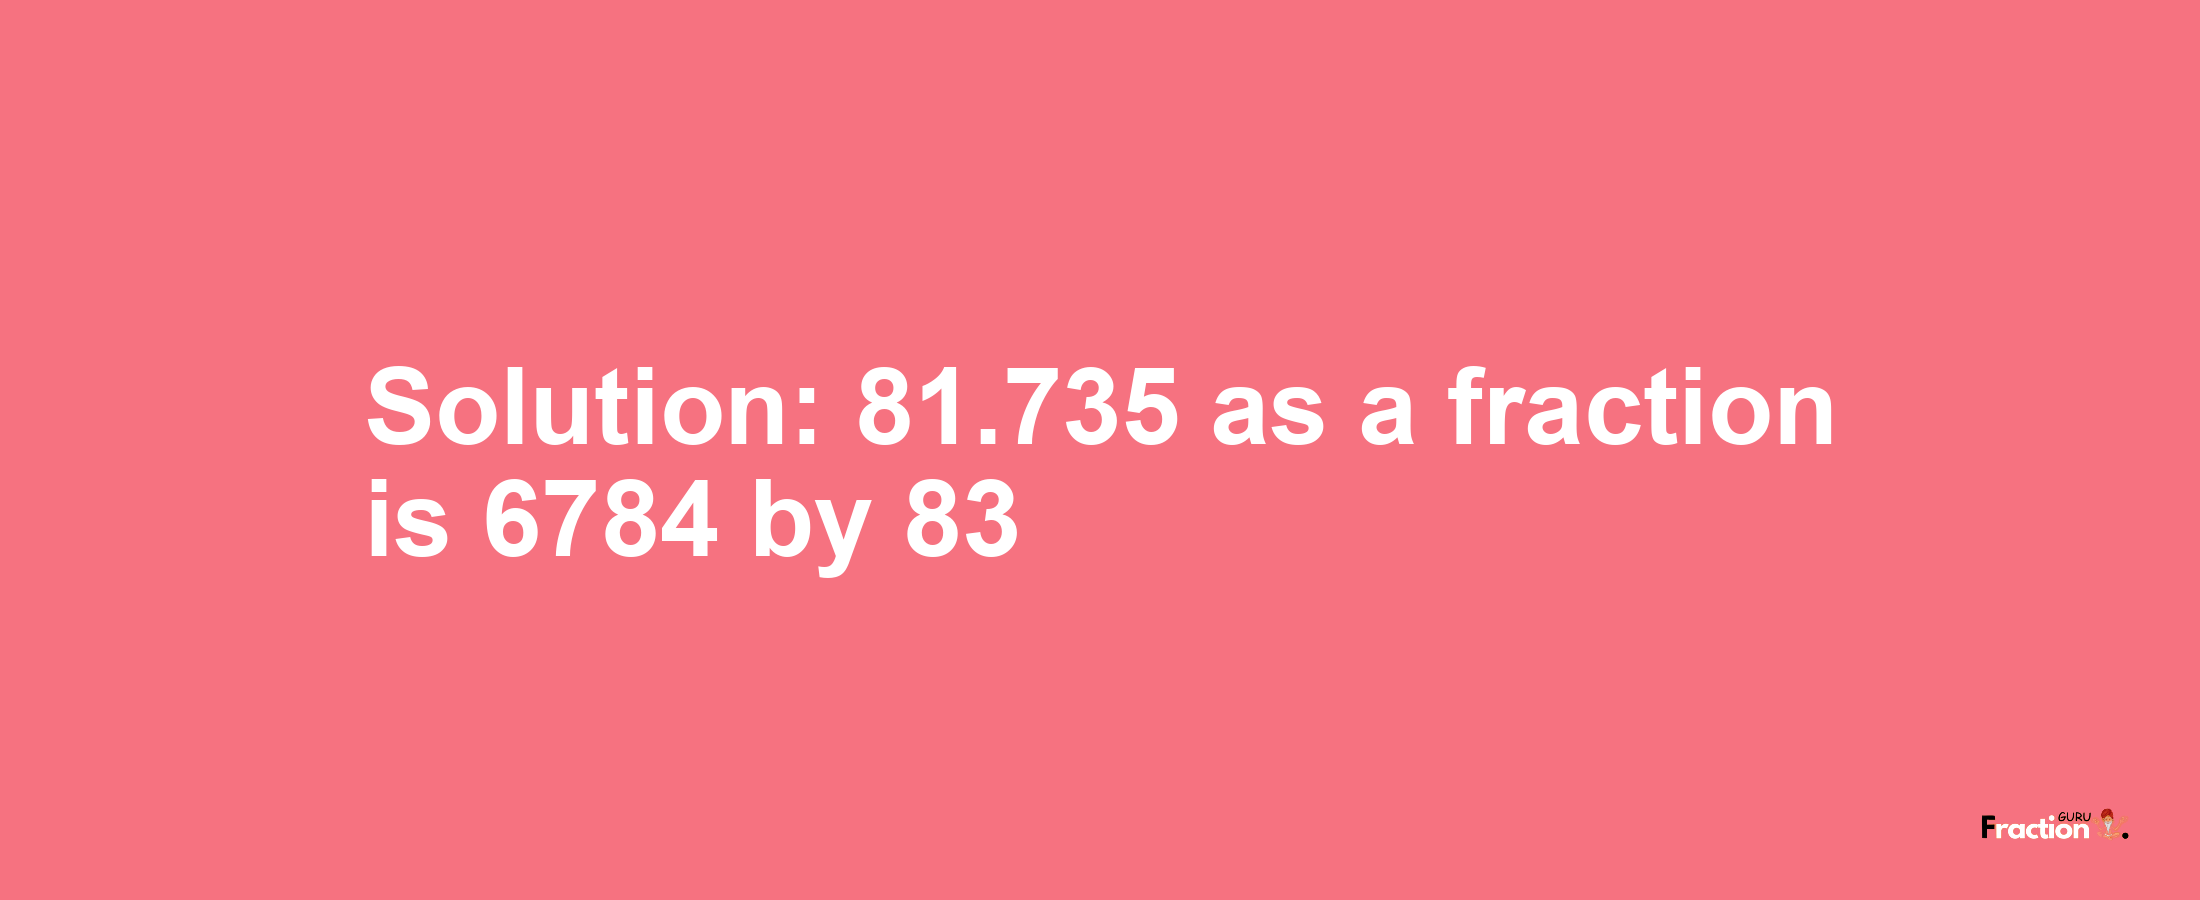 Solution:81.735 as a fraction is 6784/83